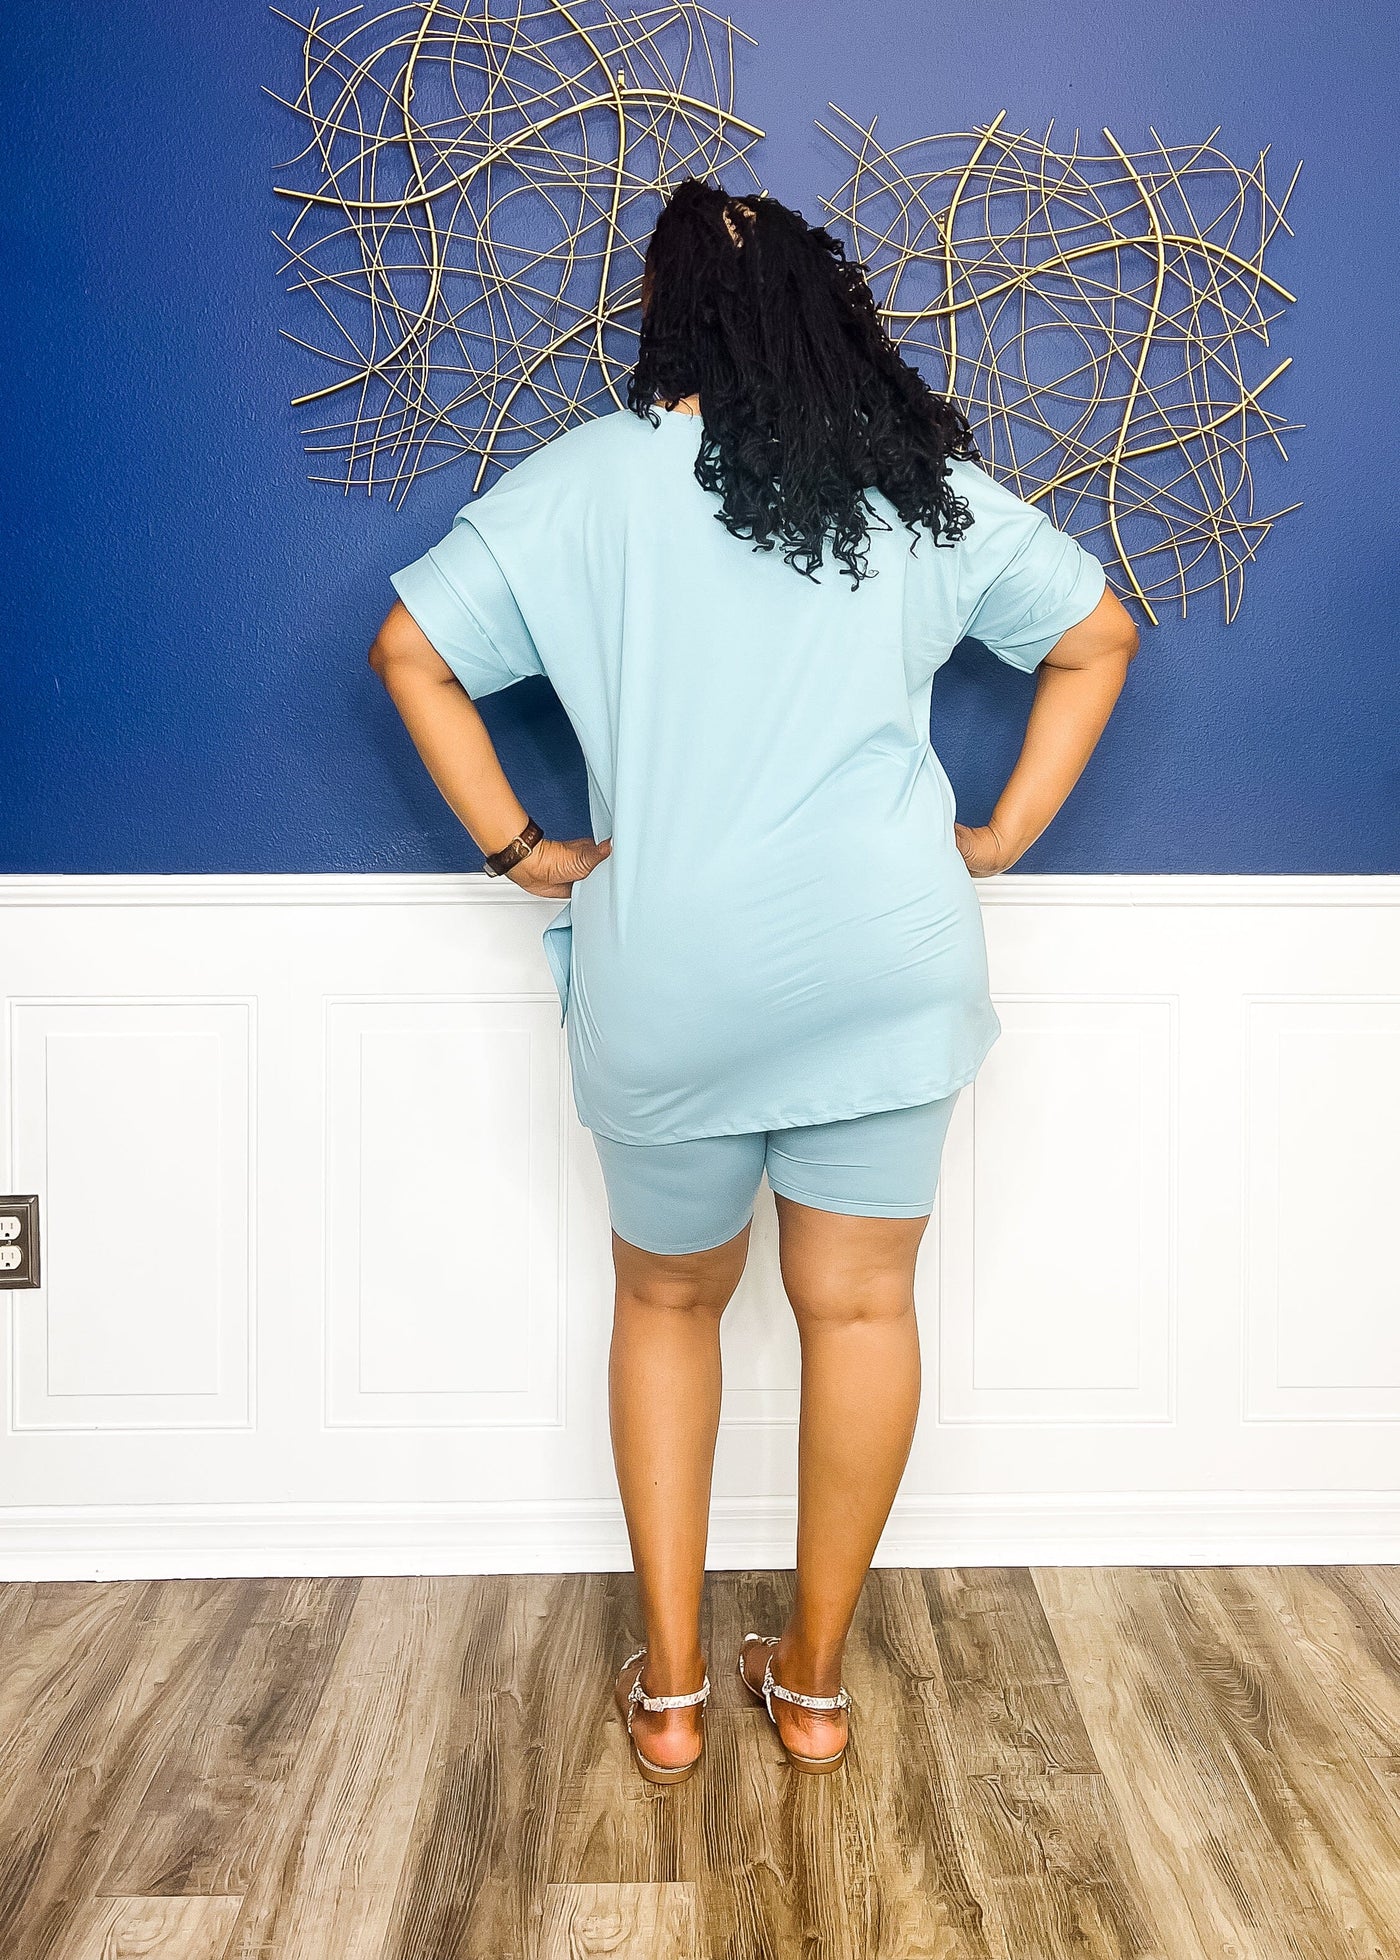 Casual Auntie Matching Short Set- Dusty Teal Outfit Sets 